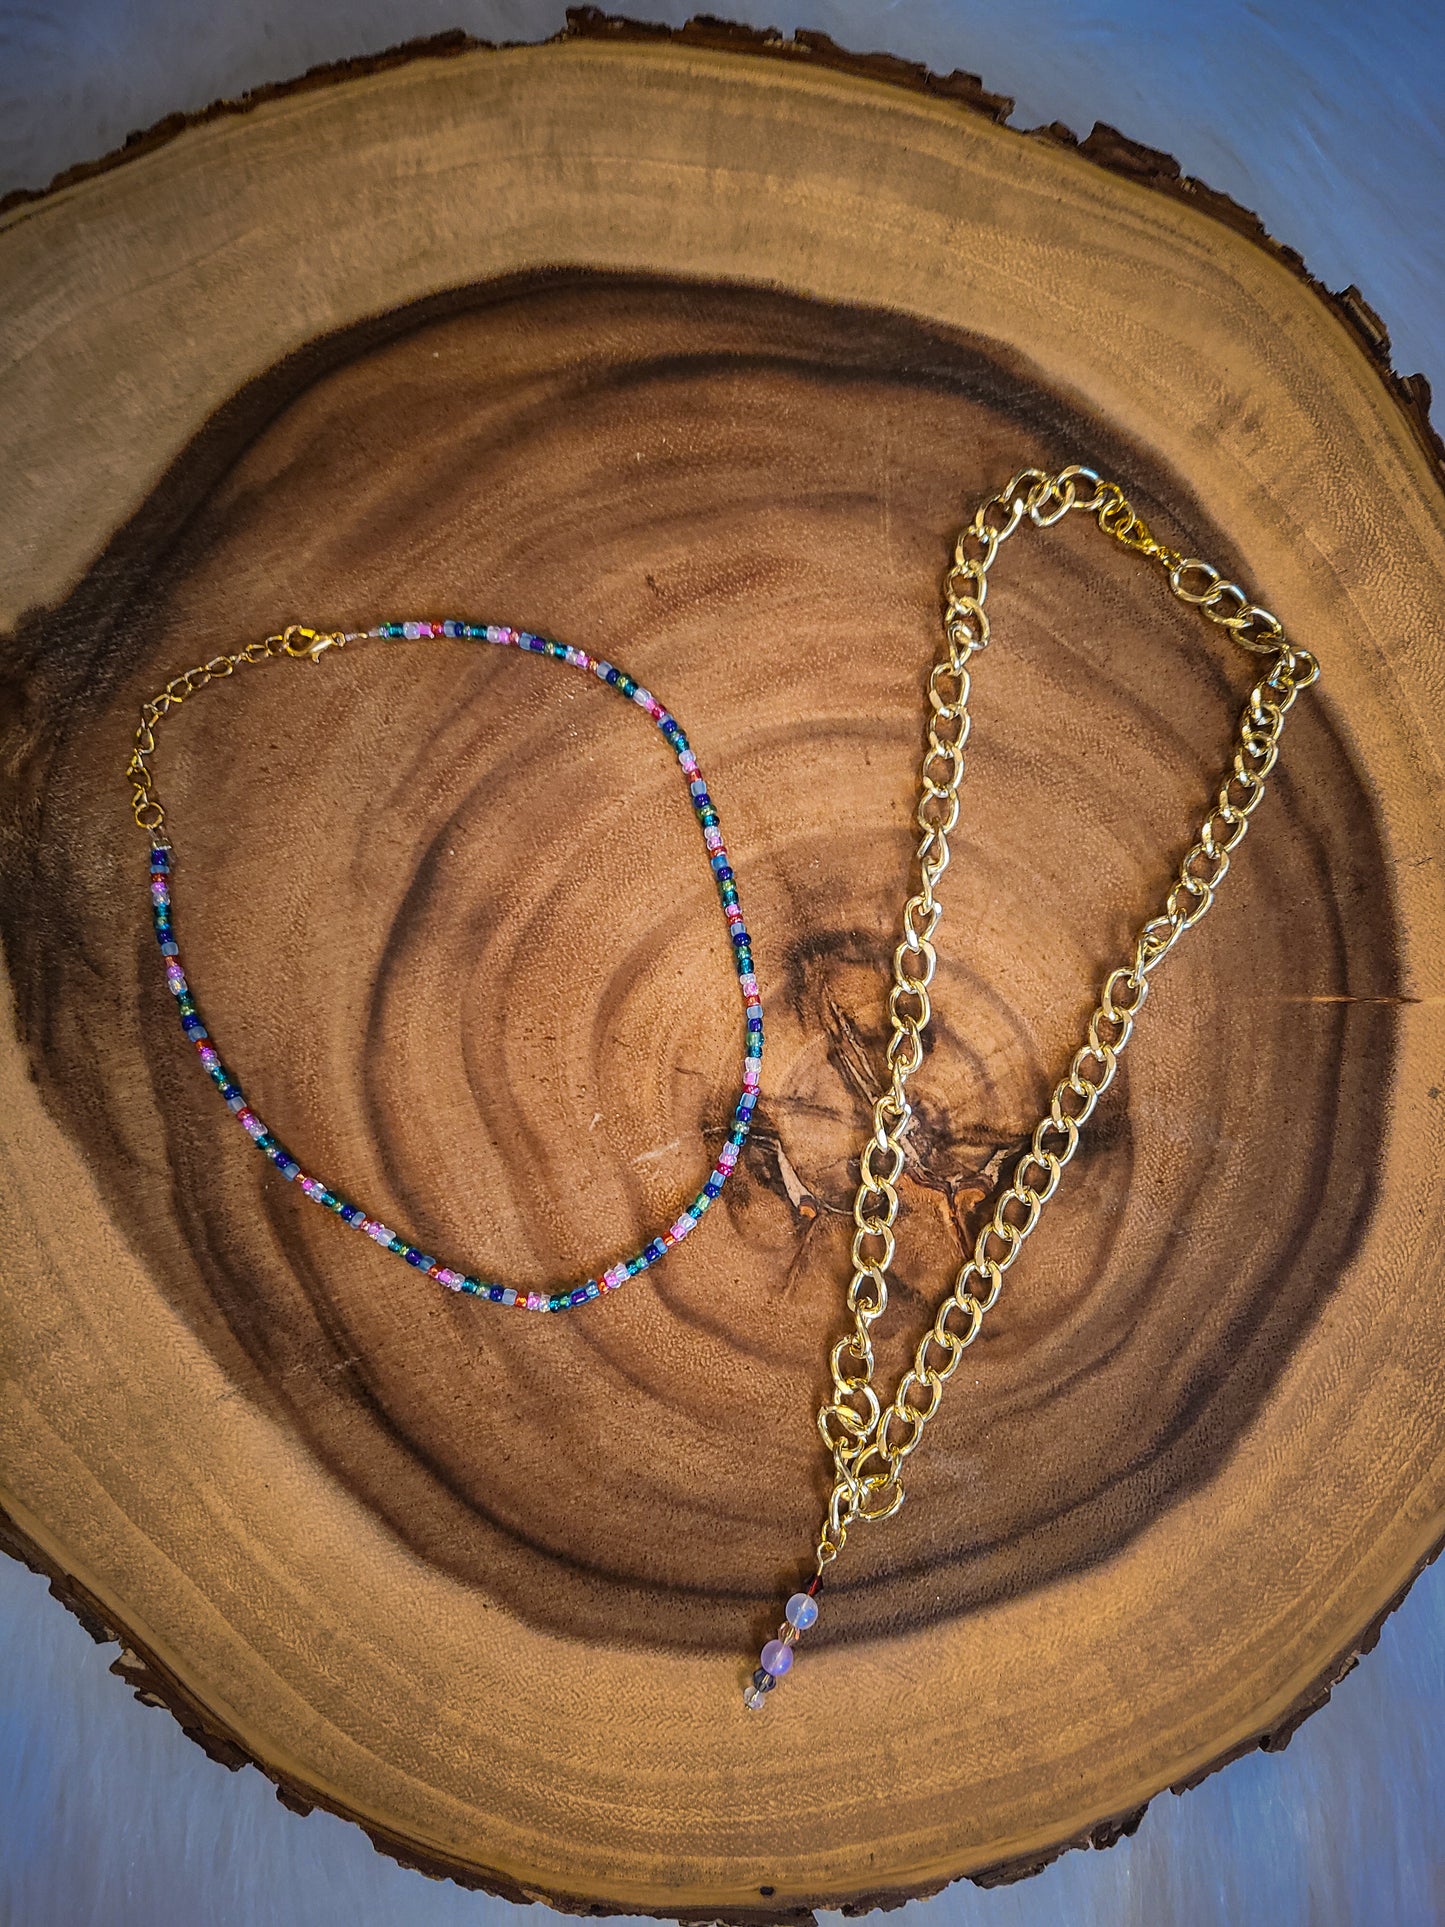 Multicolor Seed Bead Choker Necklace Set